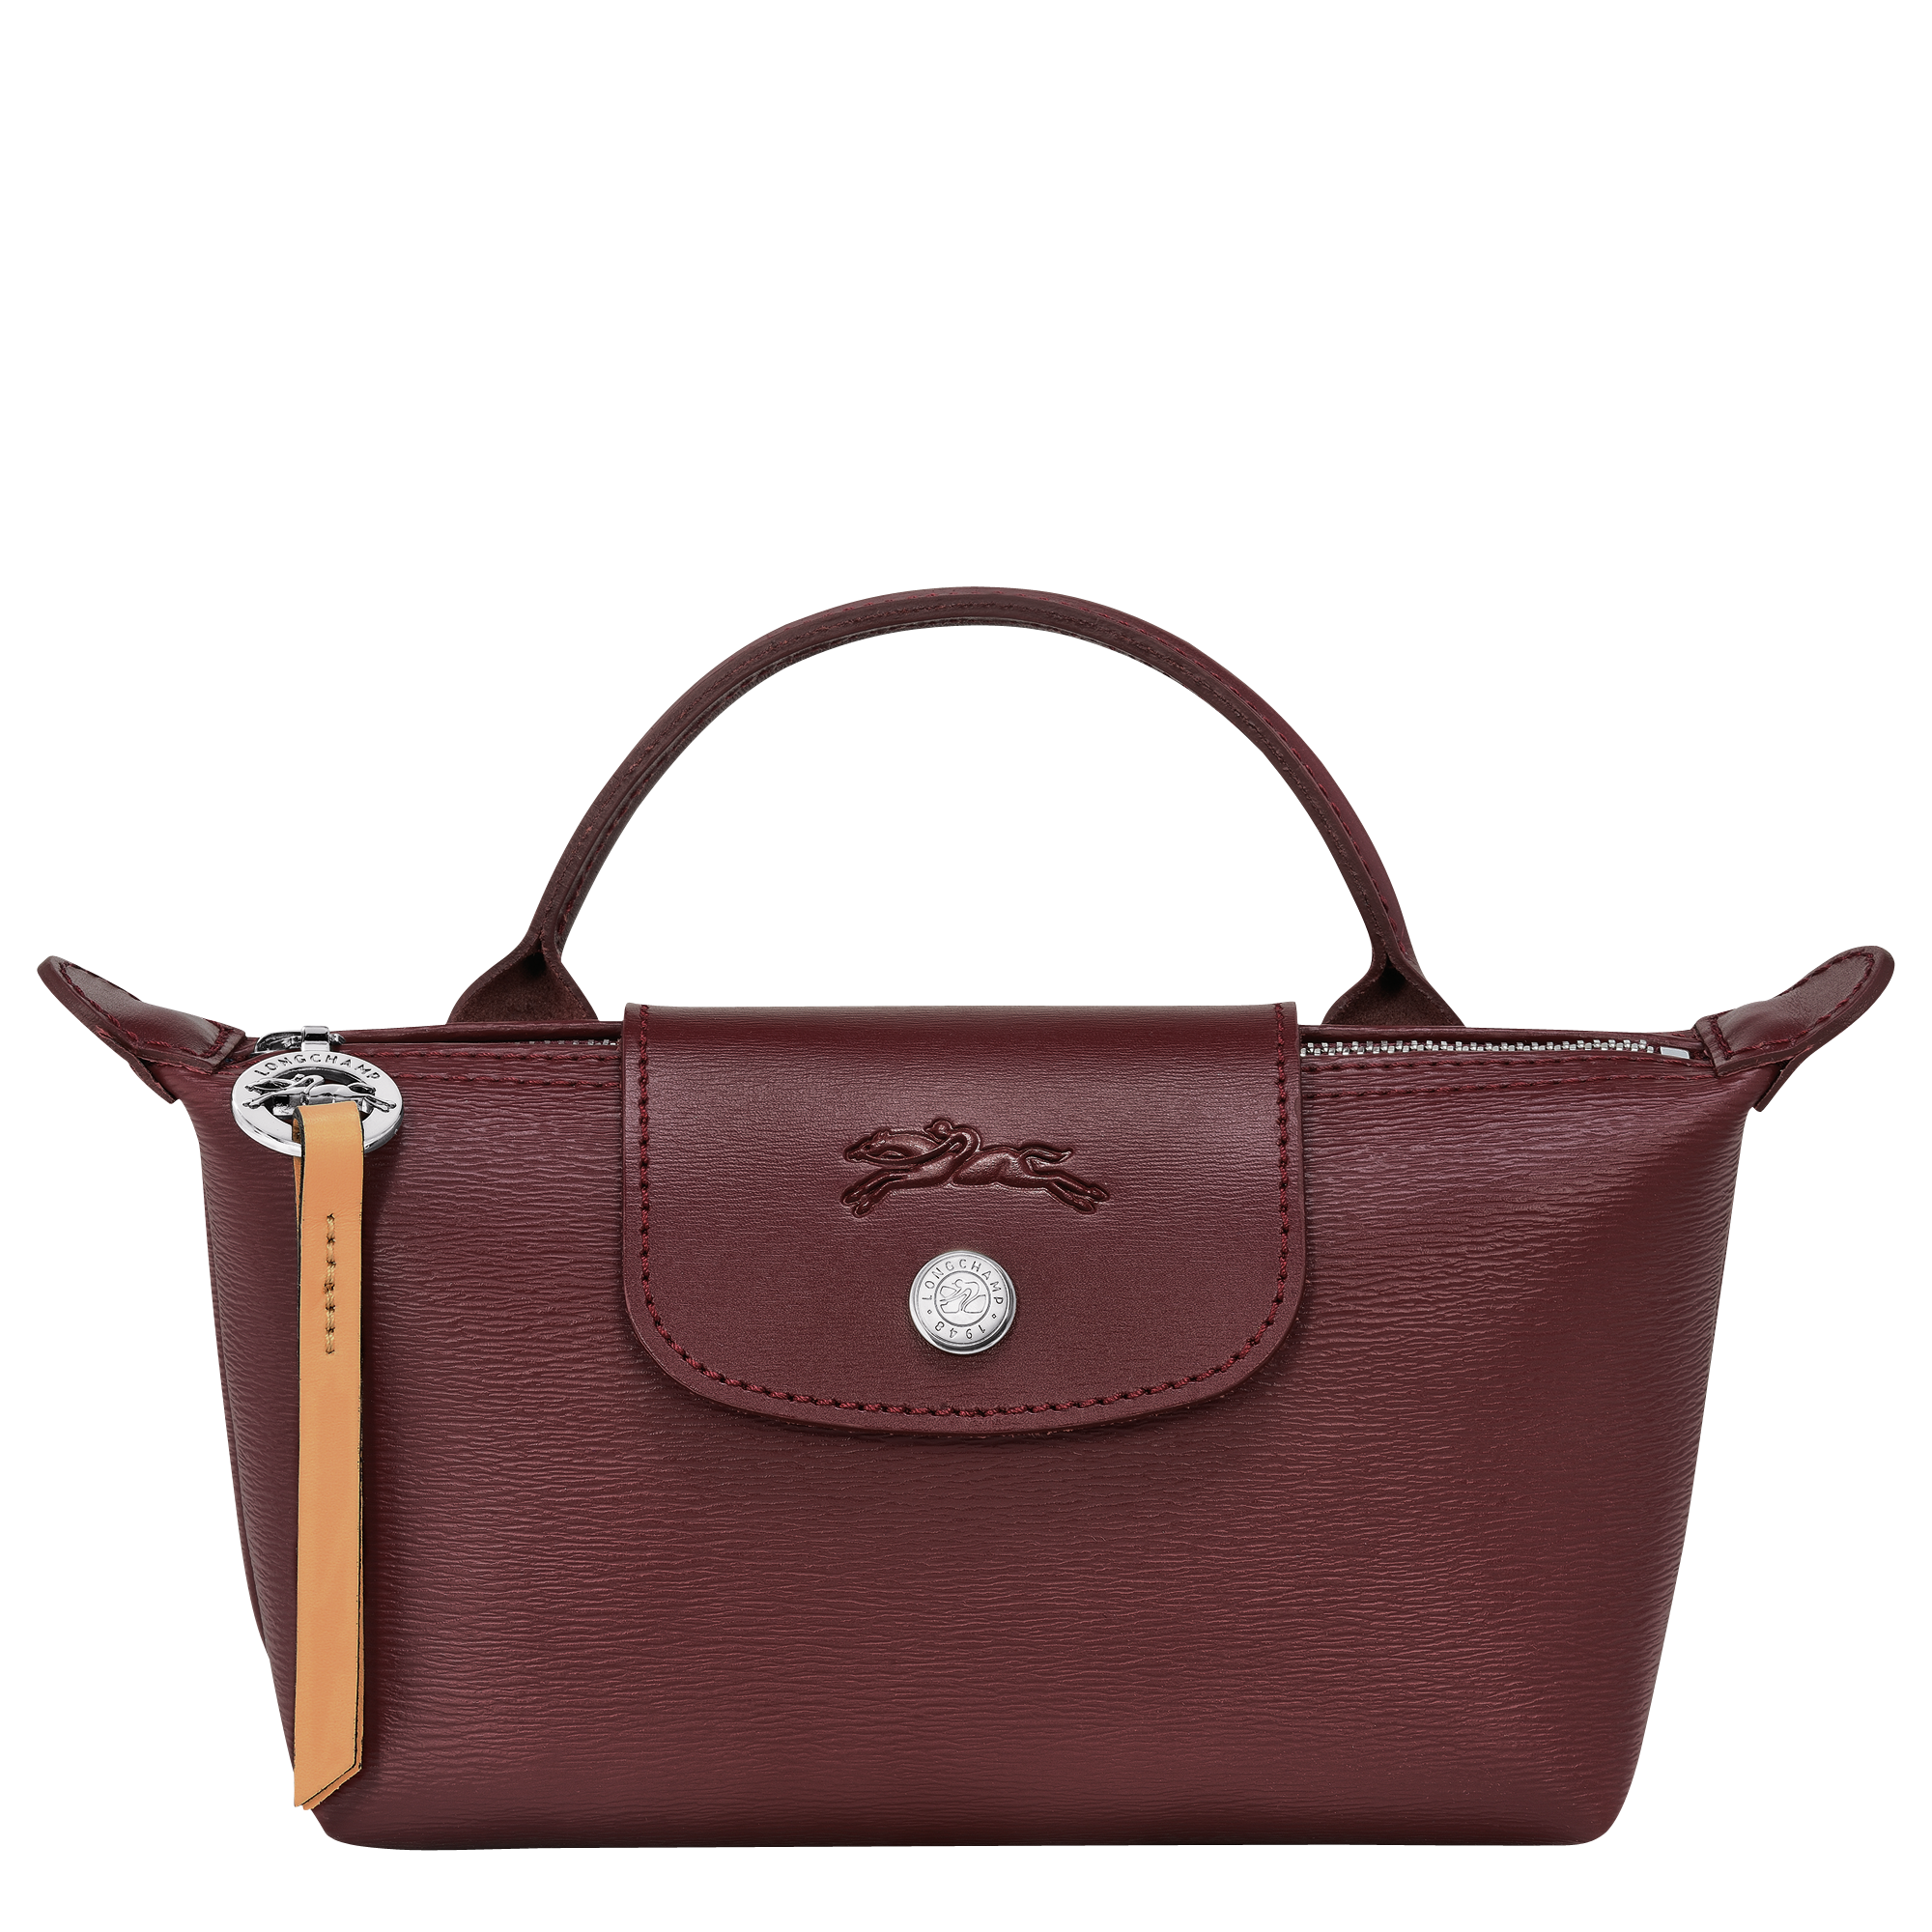 Longchamp LE PLIAGE CITY - Pouch with handle in Plum - 1 (SKU: 34175HYQ261)